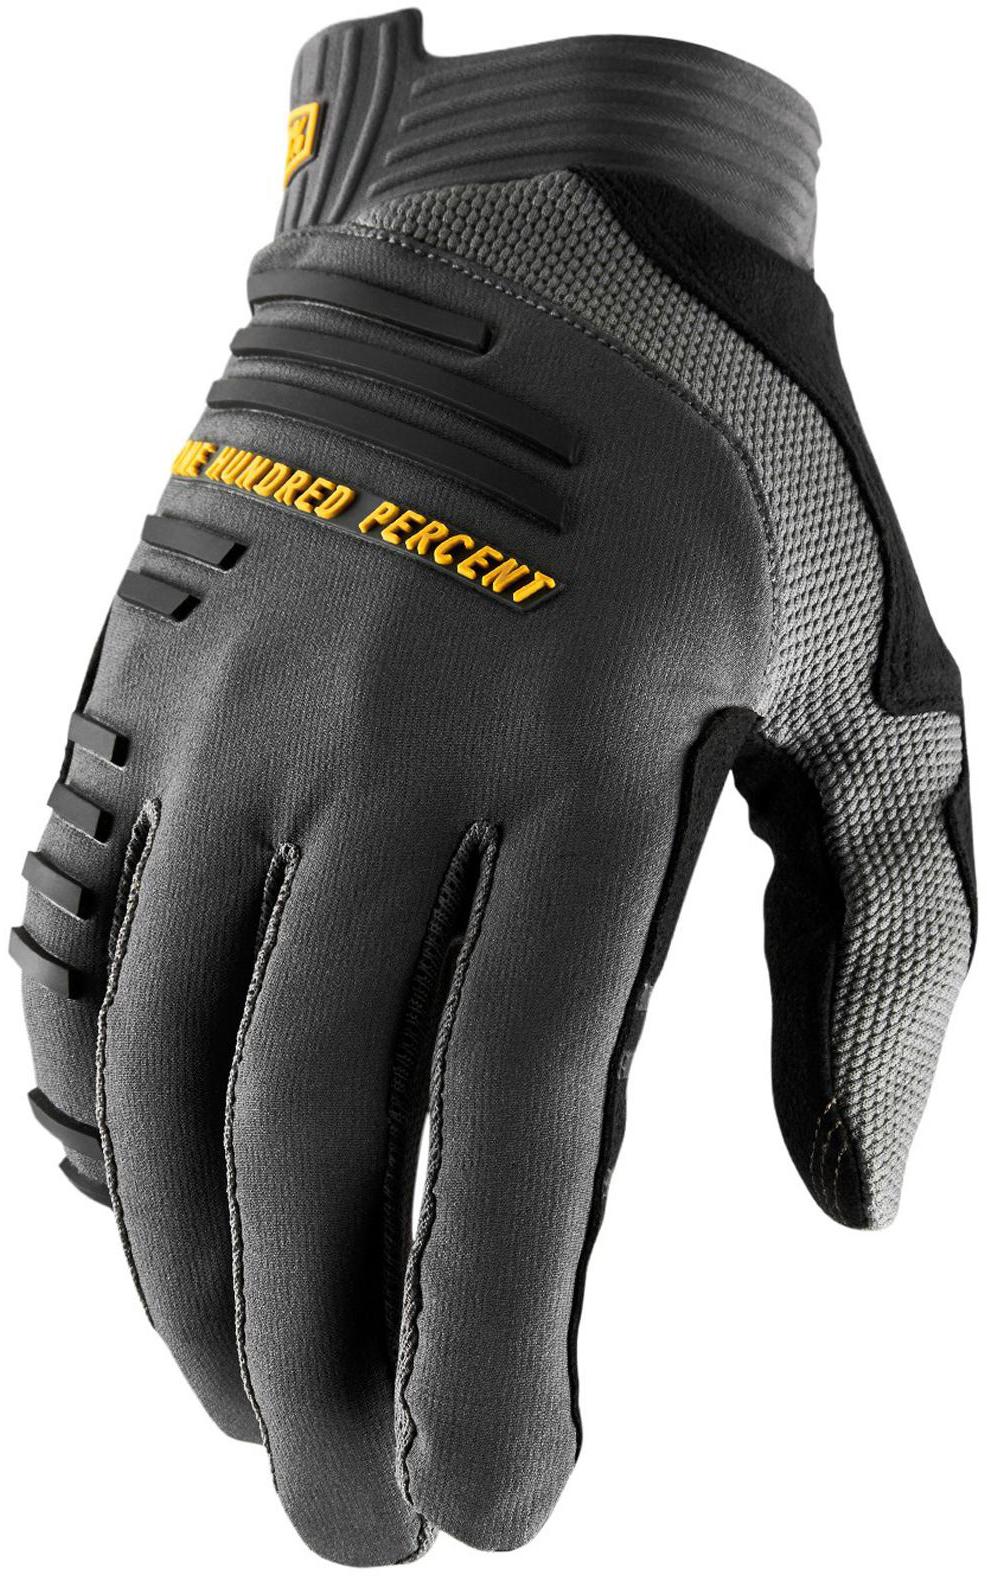 100% Cognito D30 Gloves - Xl Black/charcoal   Gloves